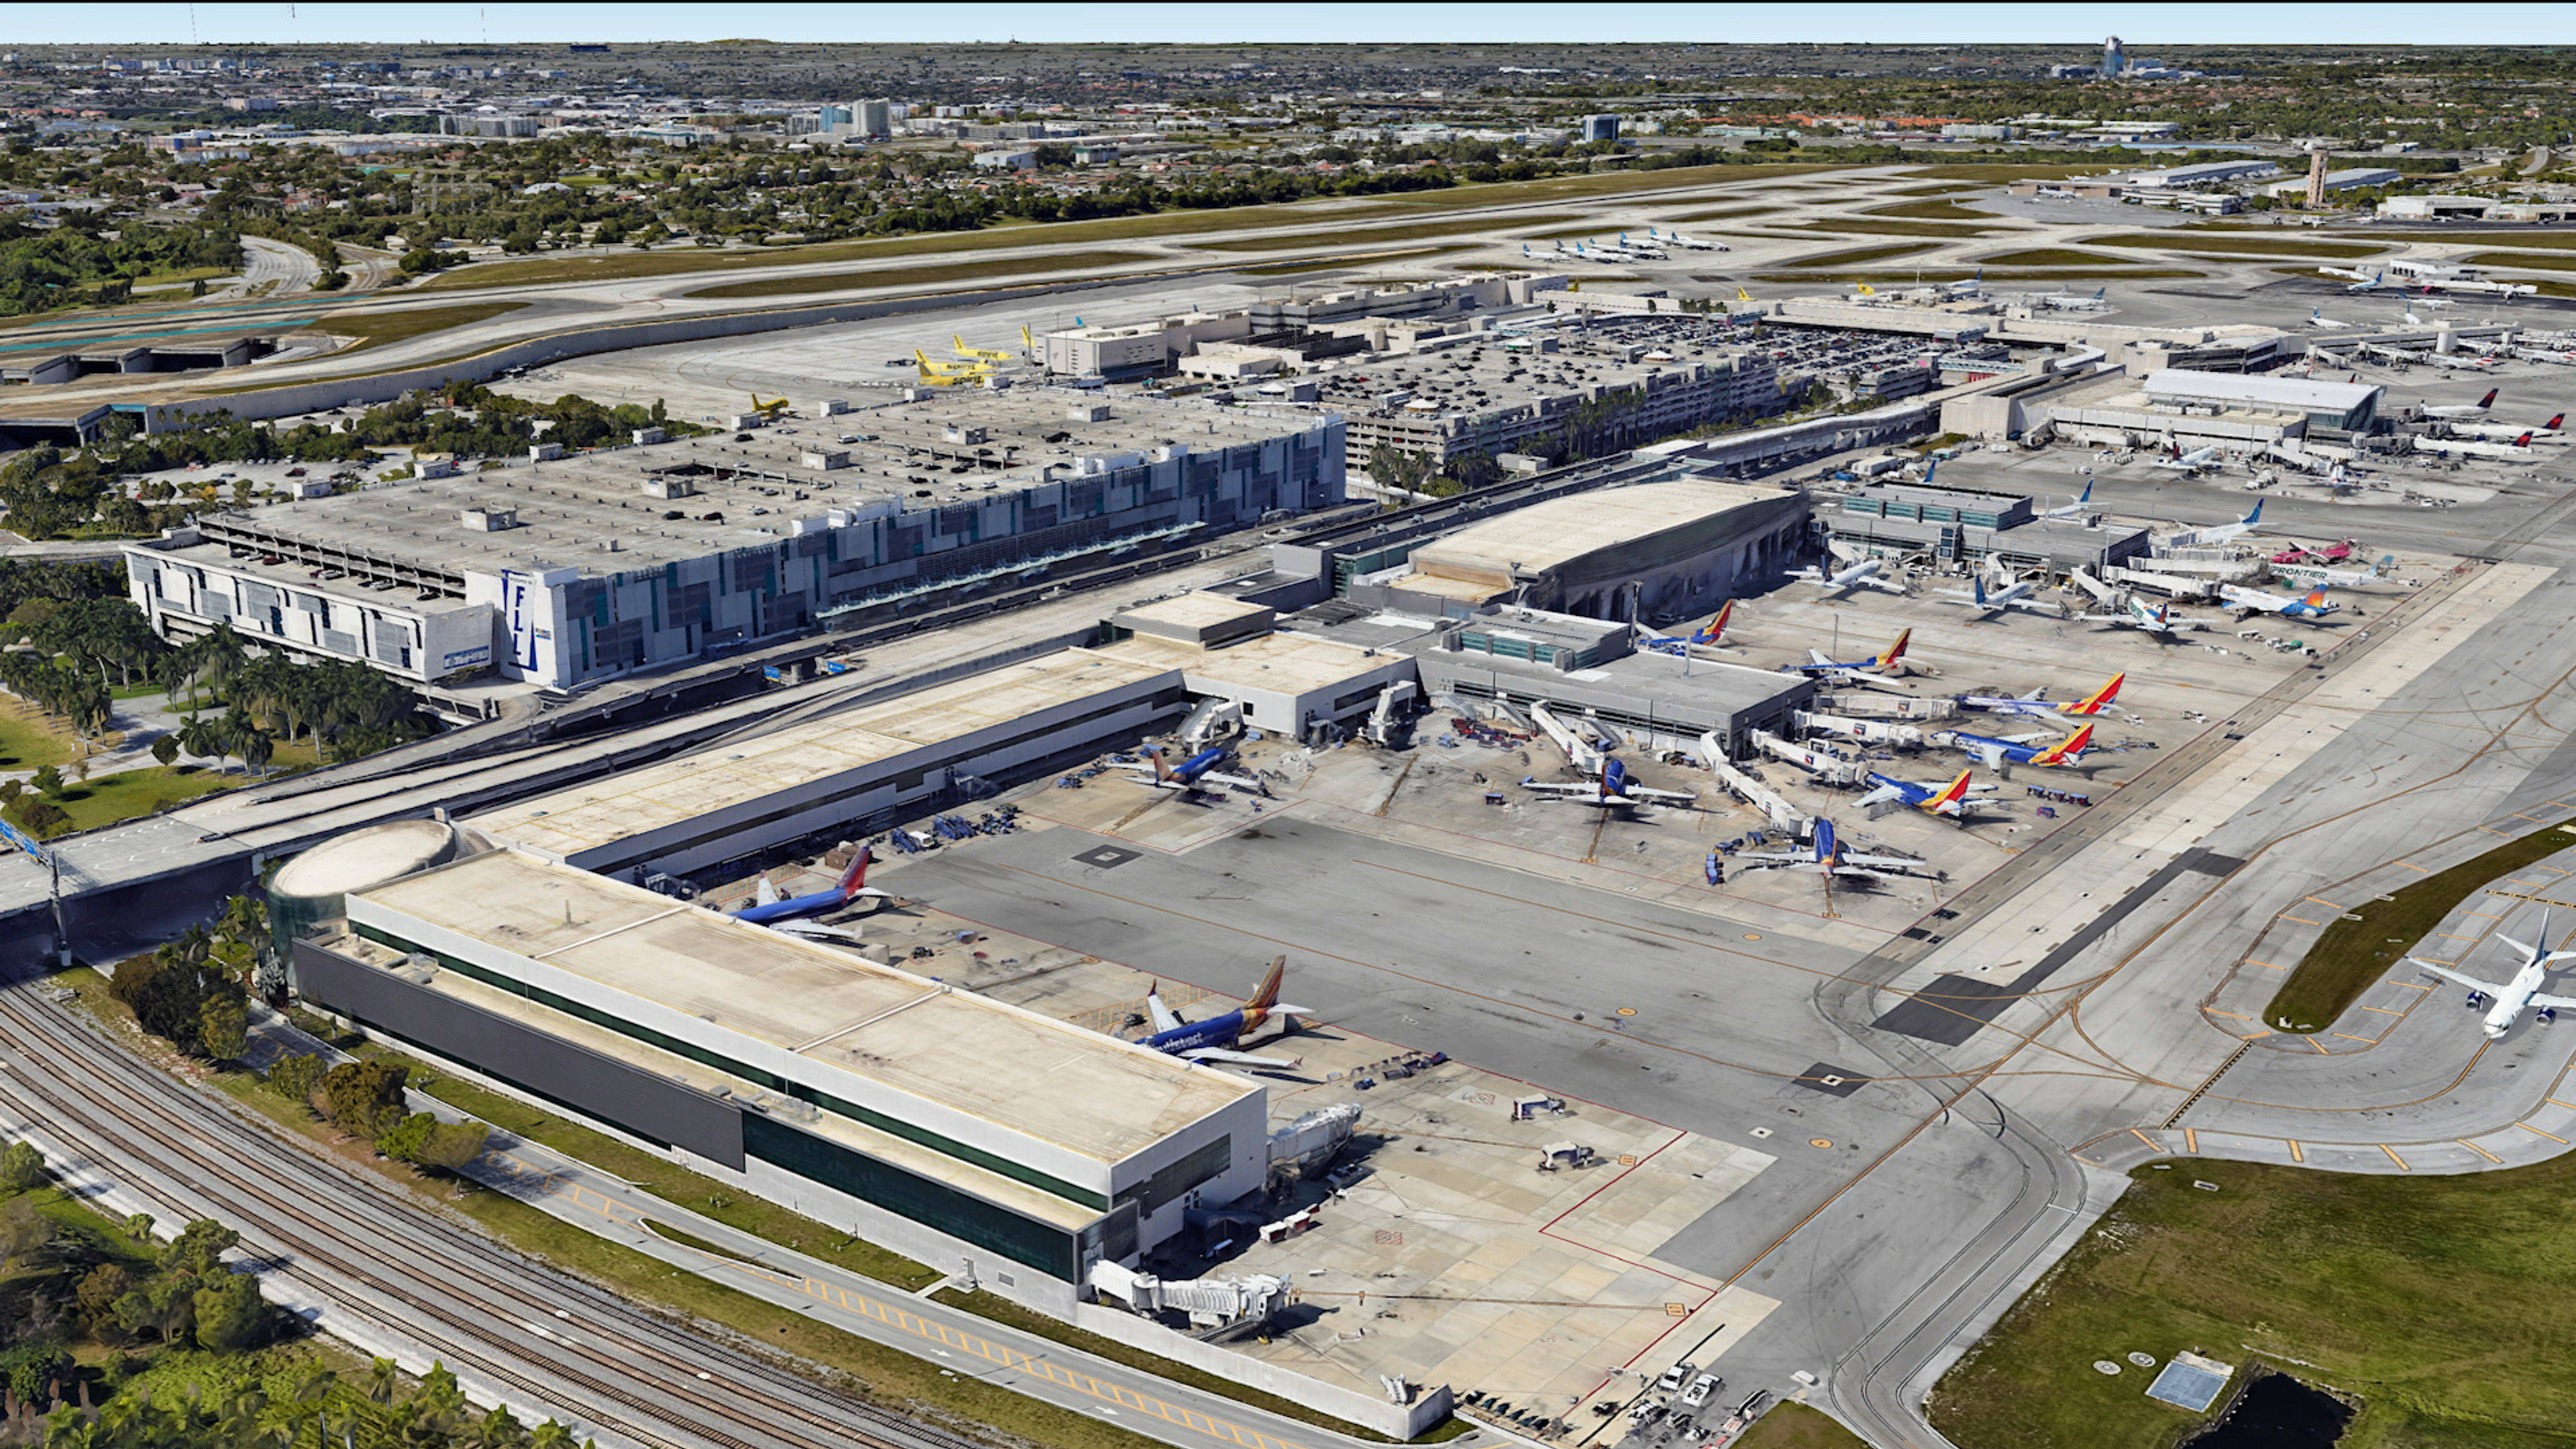 Aerial View of Fort Lauderdale Hollywood Airport